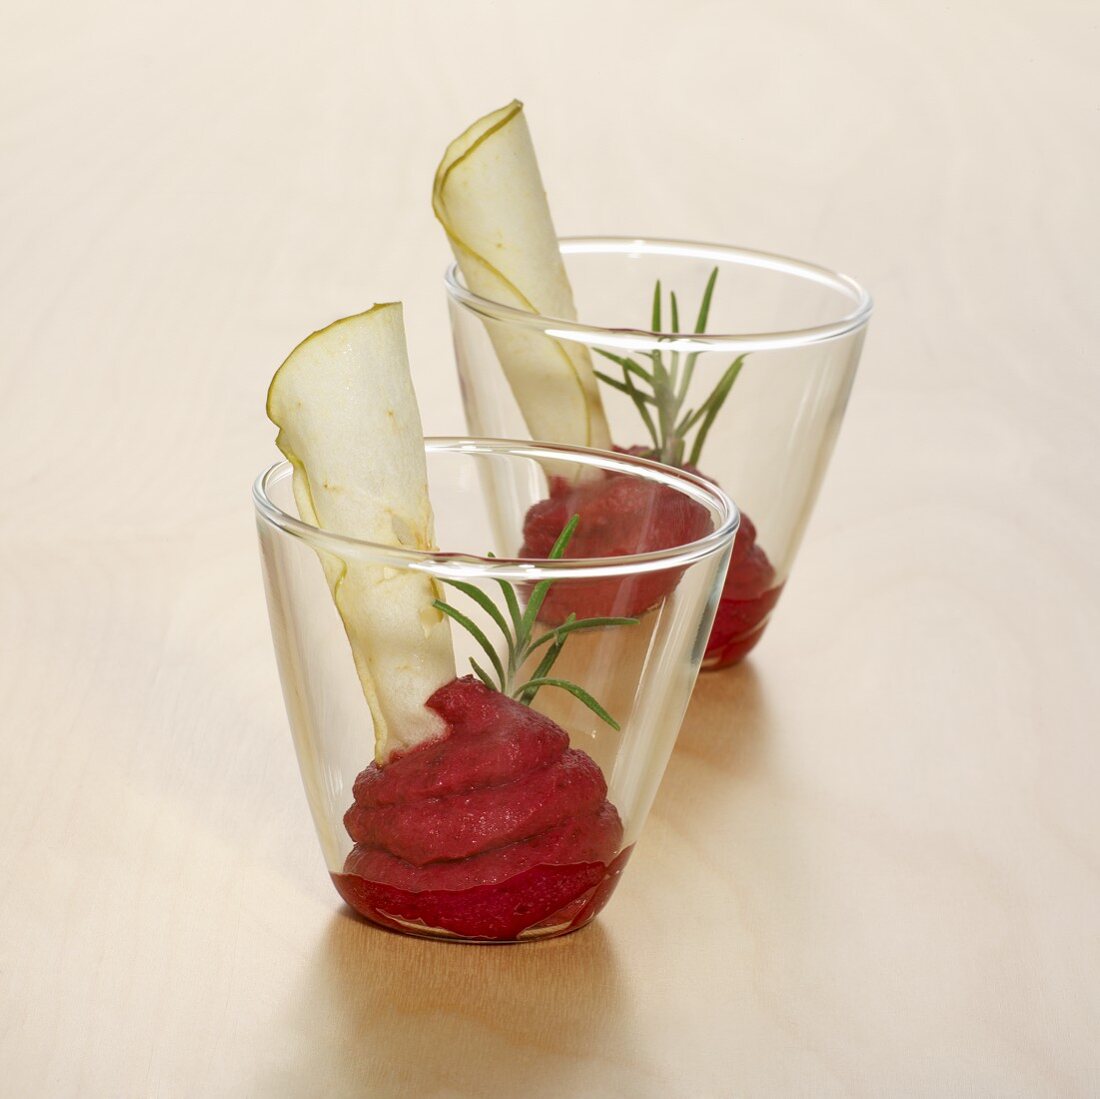 Beetroot mousse in two glasses